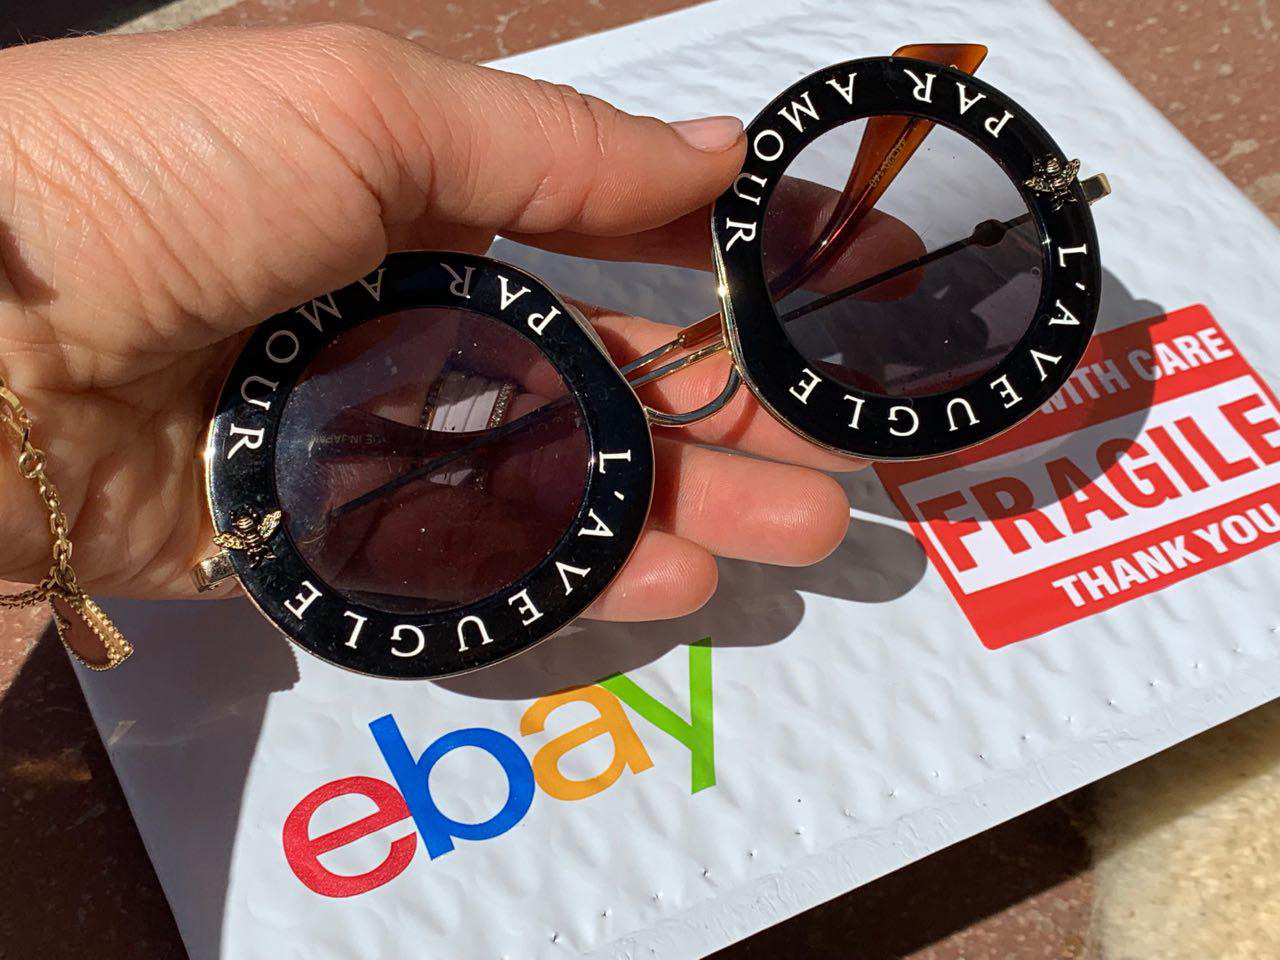 You Can Buy Almost Everything on eBay